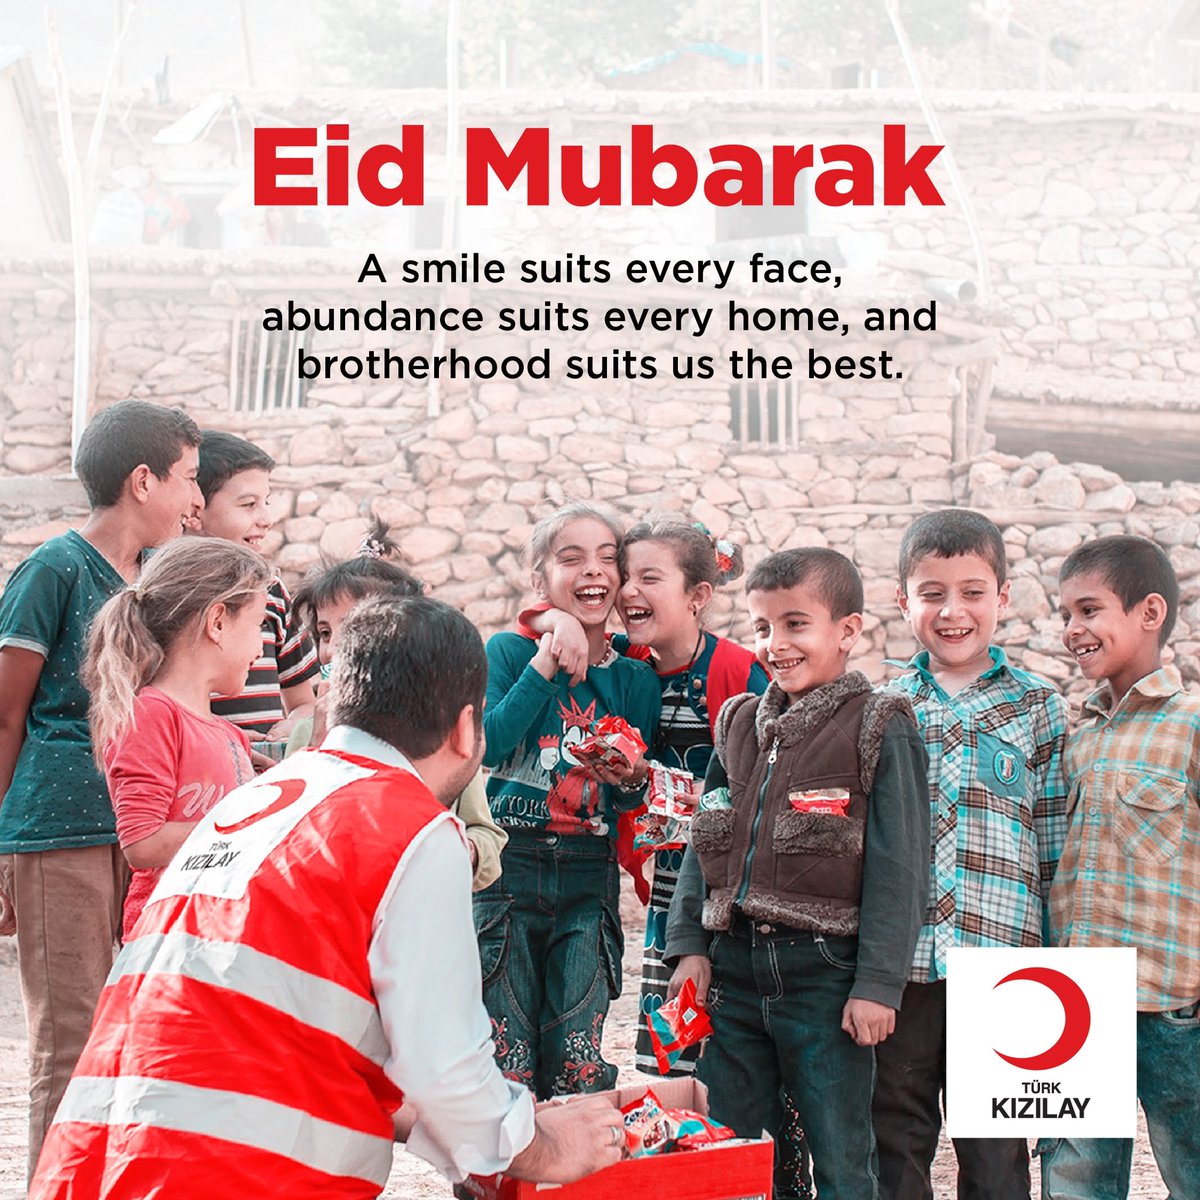 We have reached the end of another Ramadan month, where we deeply feel the joy of sharing and we have also brought smiles to millions of people in need. Wishing you a blessed #EidAlFitr! 🌙 🍬